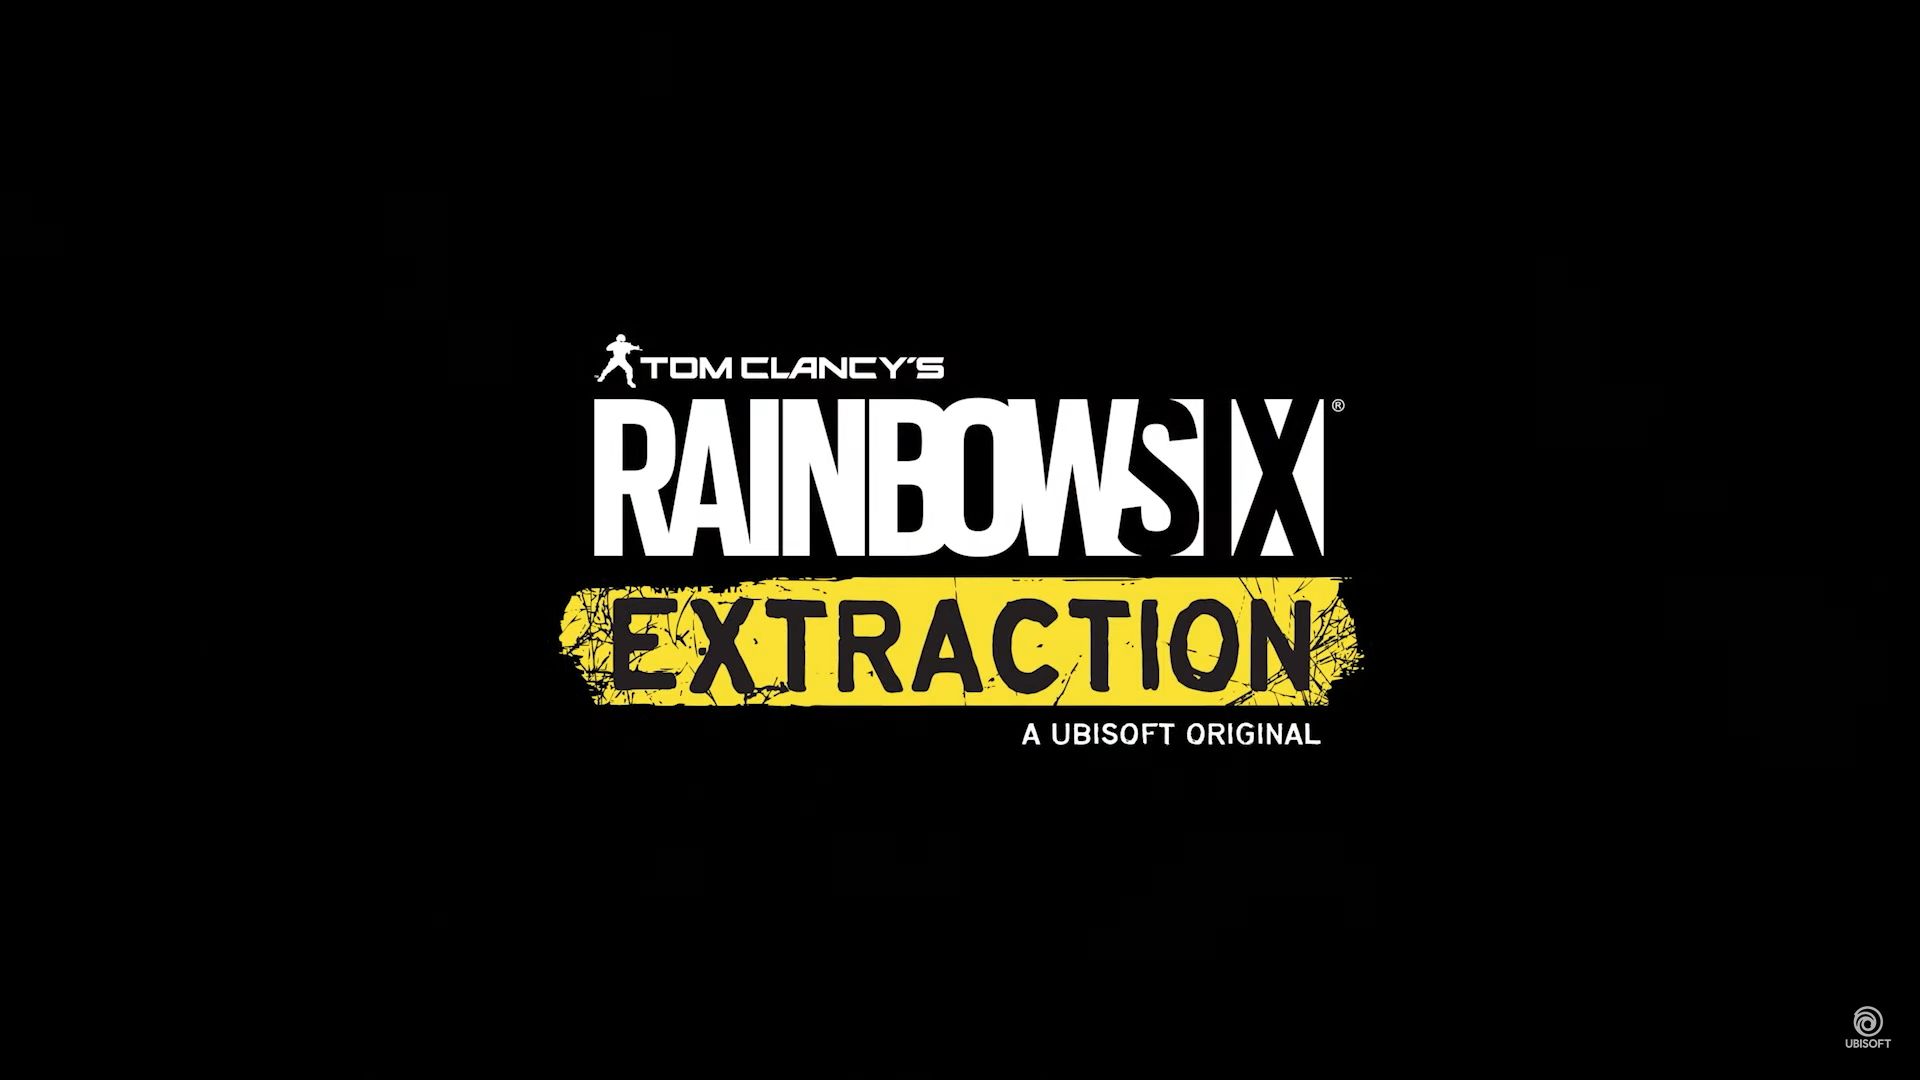 Will Rainbow Six Extraction have crossplay?